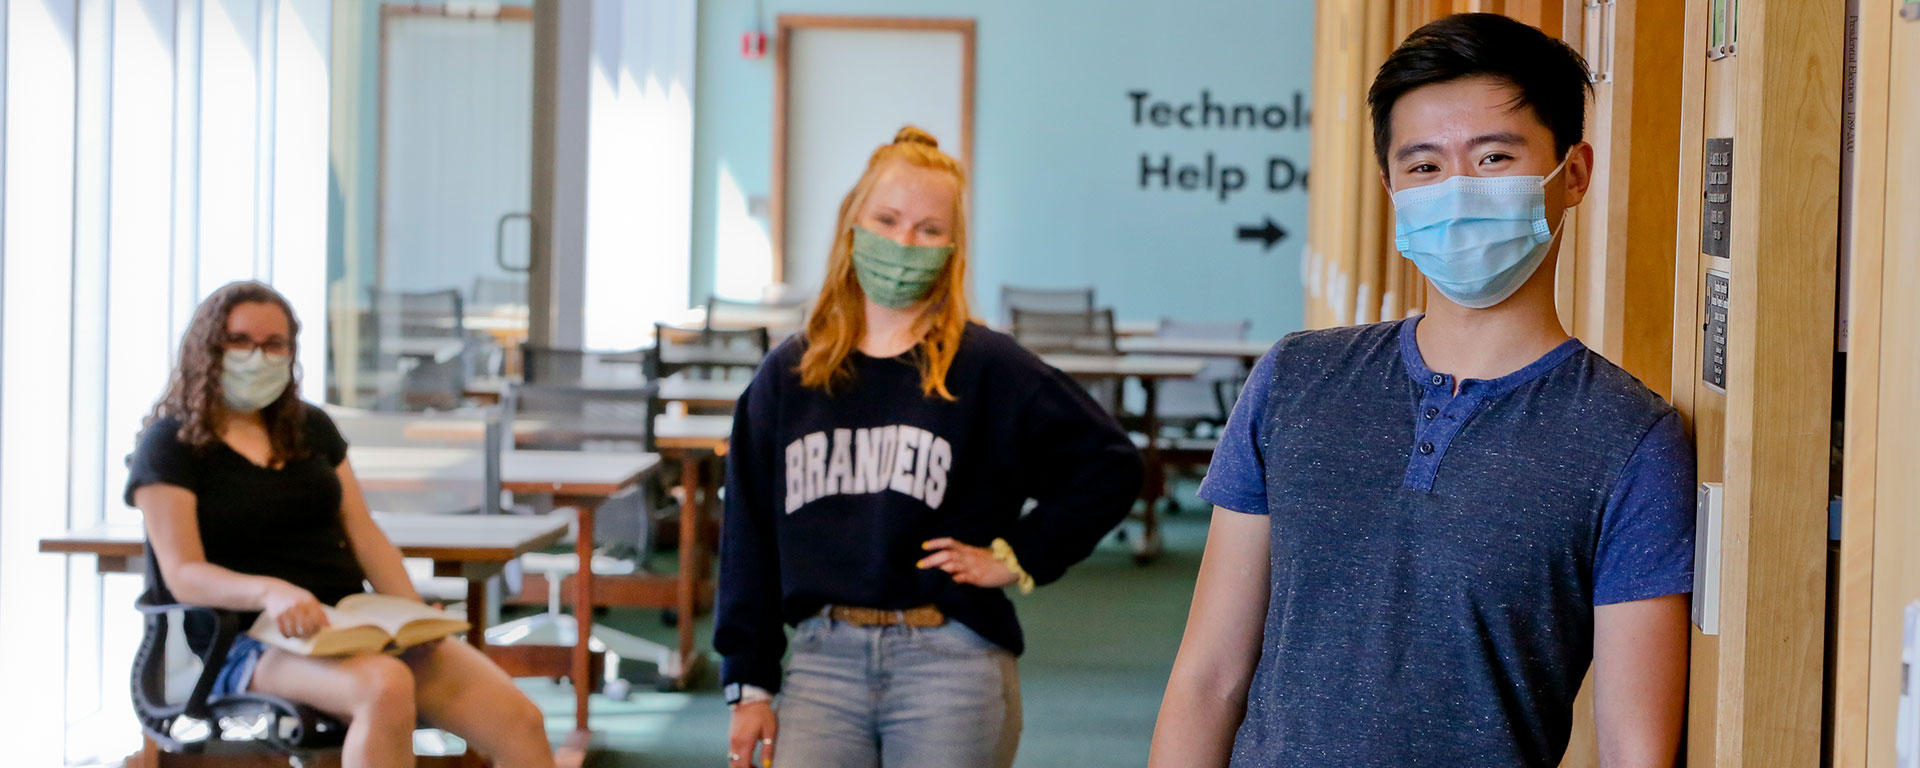 Students in masks stand socially distanced in the library.